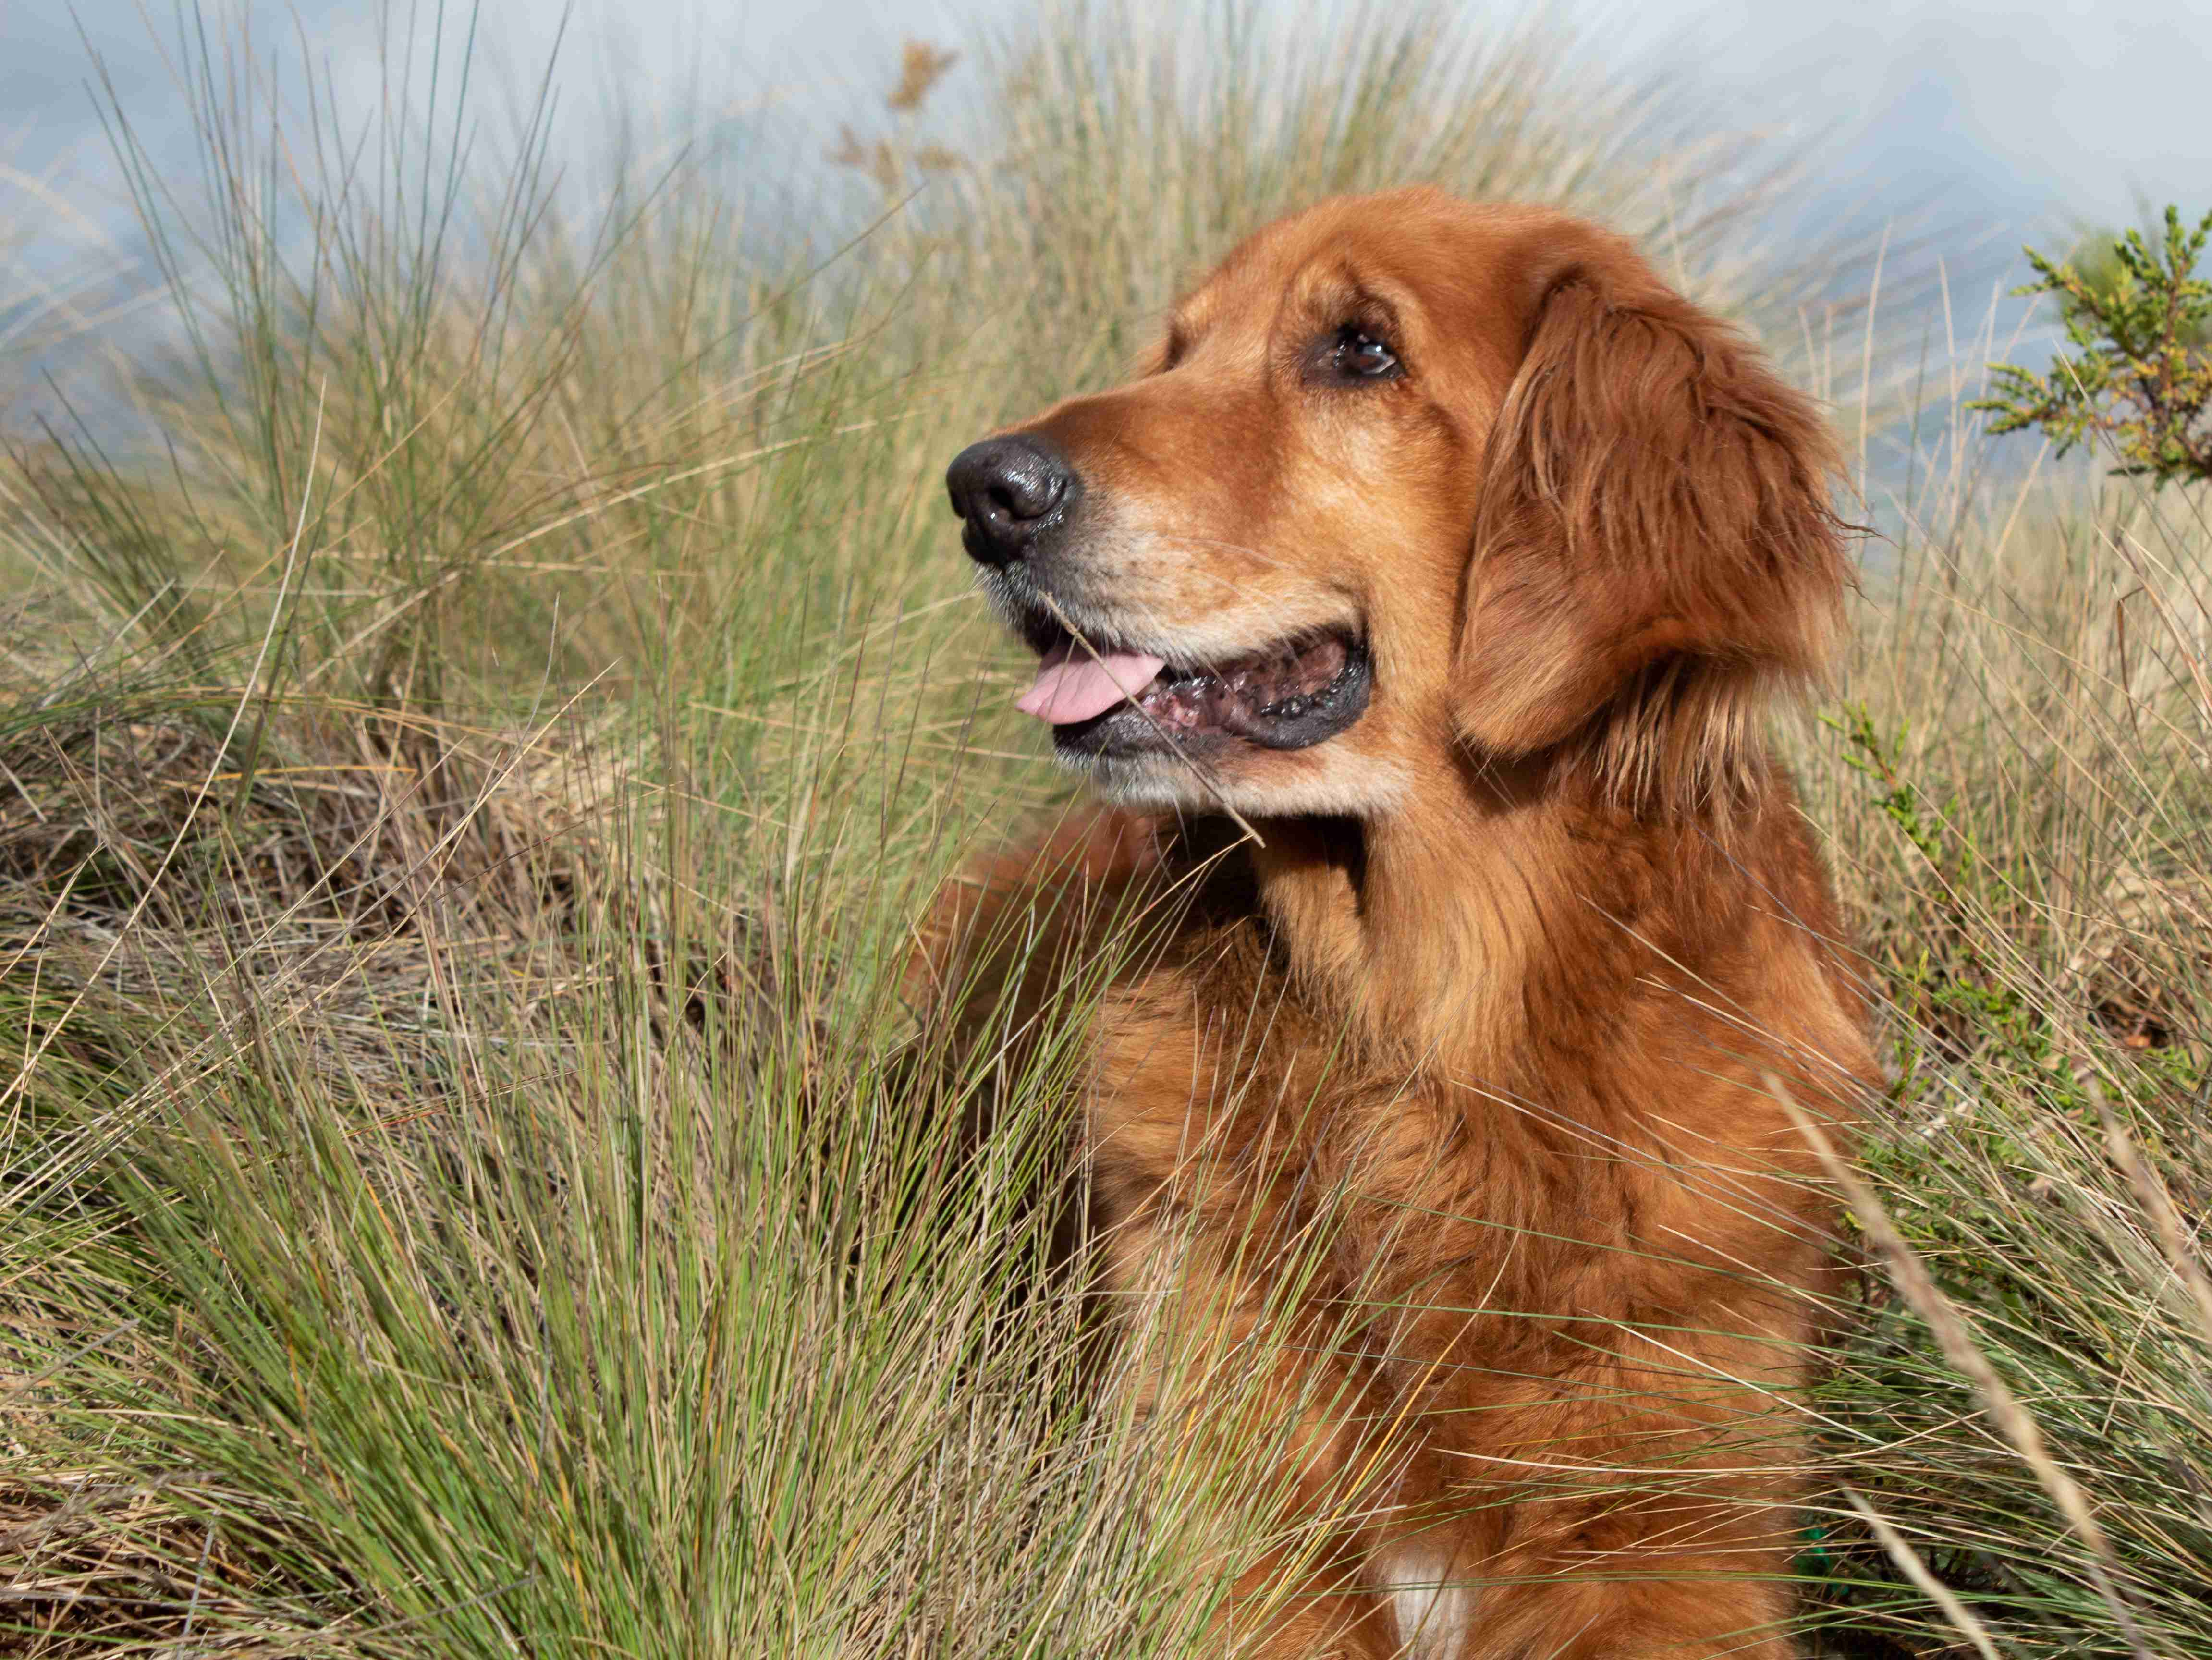 What are some signs of dental problems in Golden Retrievers?